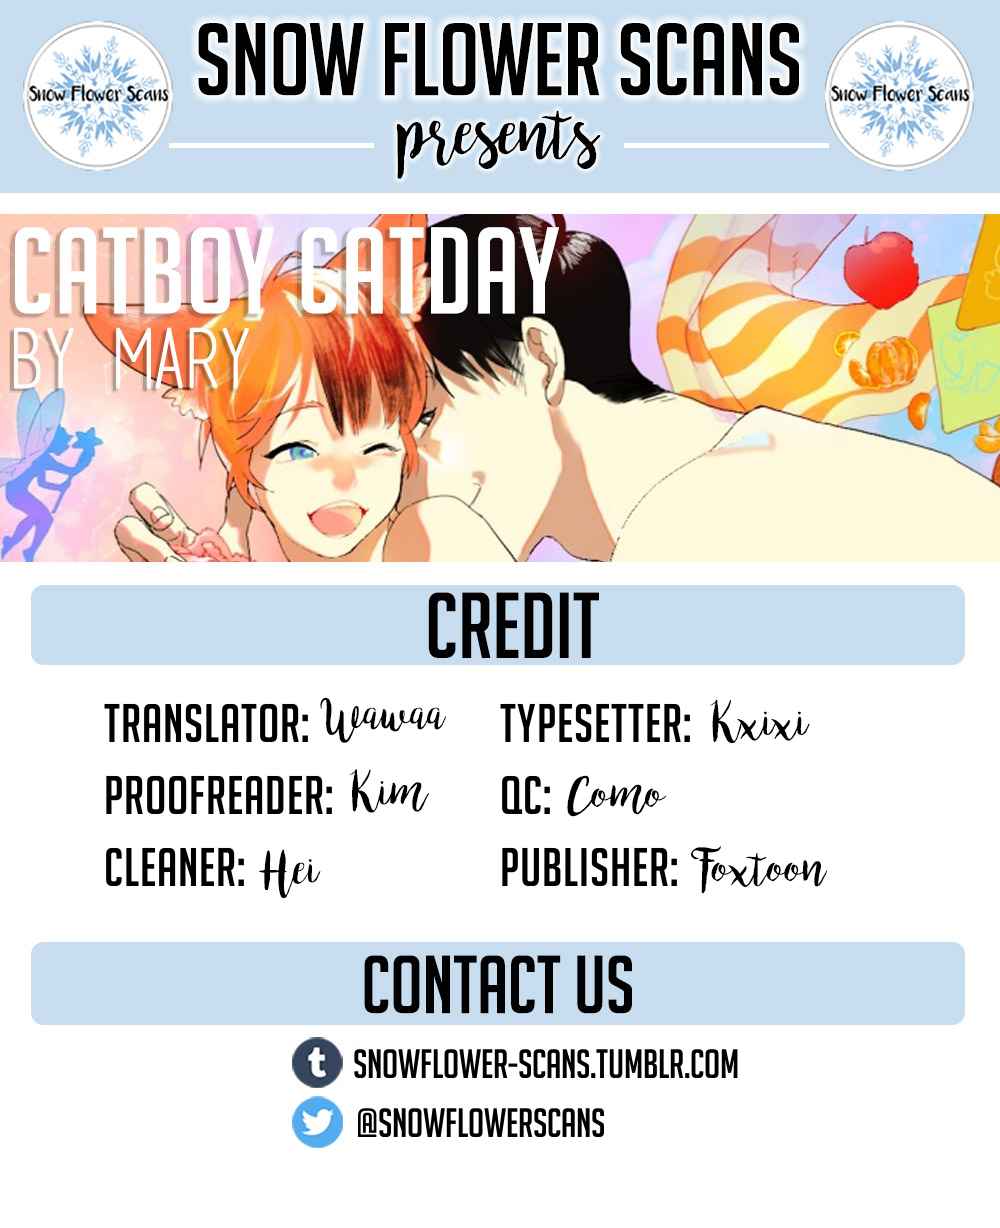 Catboy Catday Ch. 44 Reach Out to You